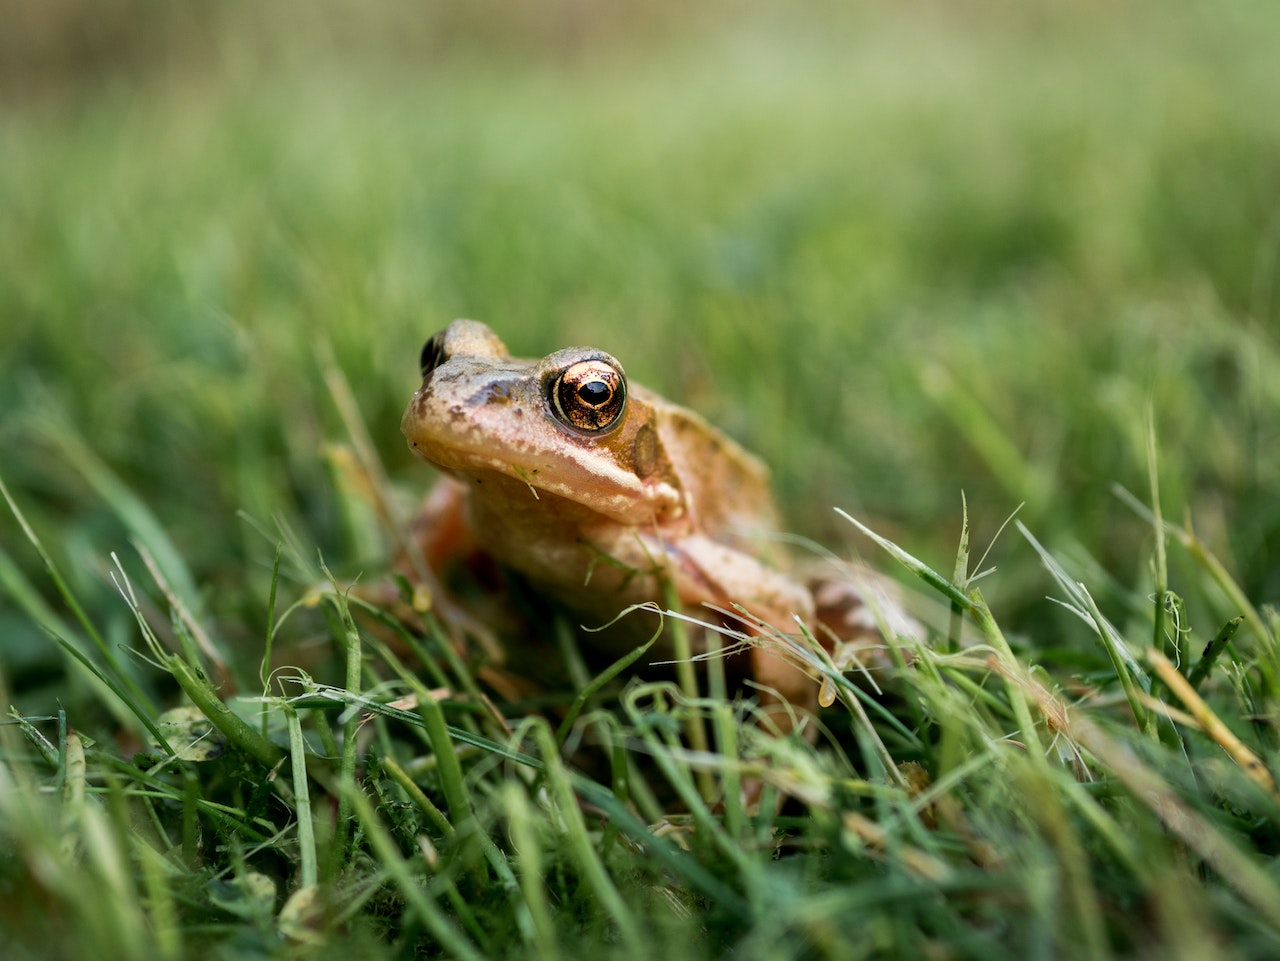 Brown Frog on Grass